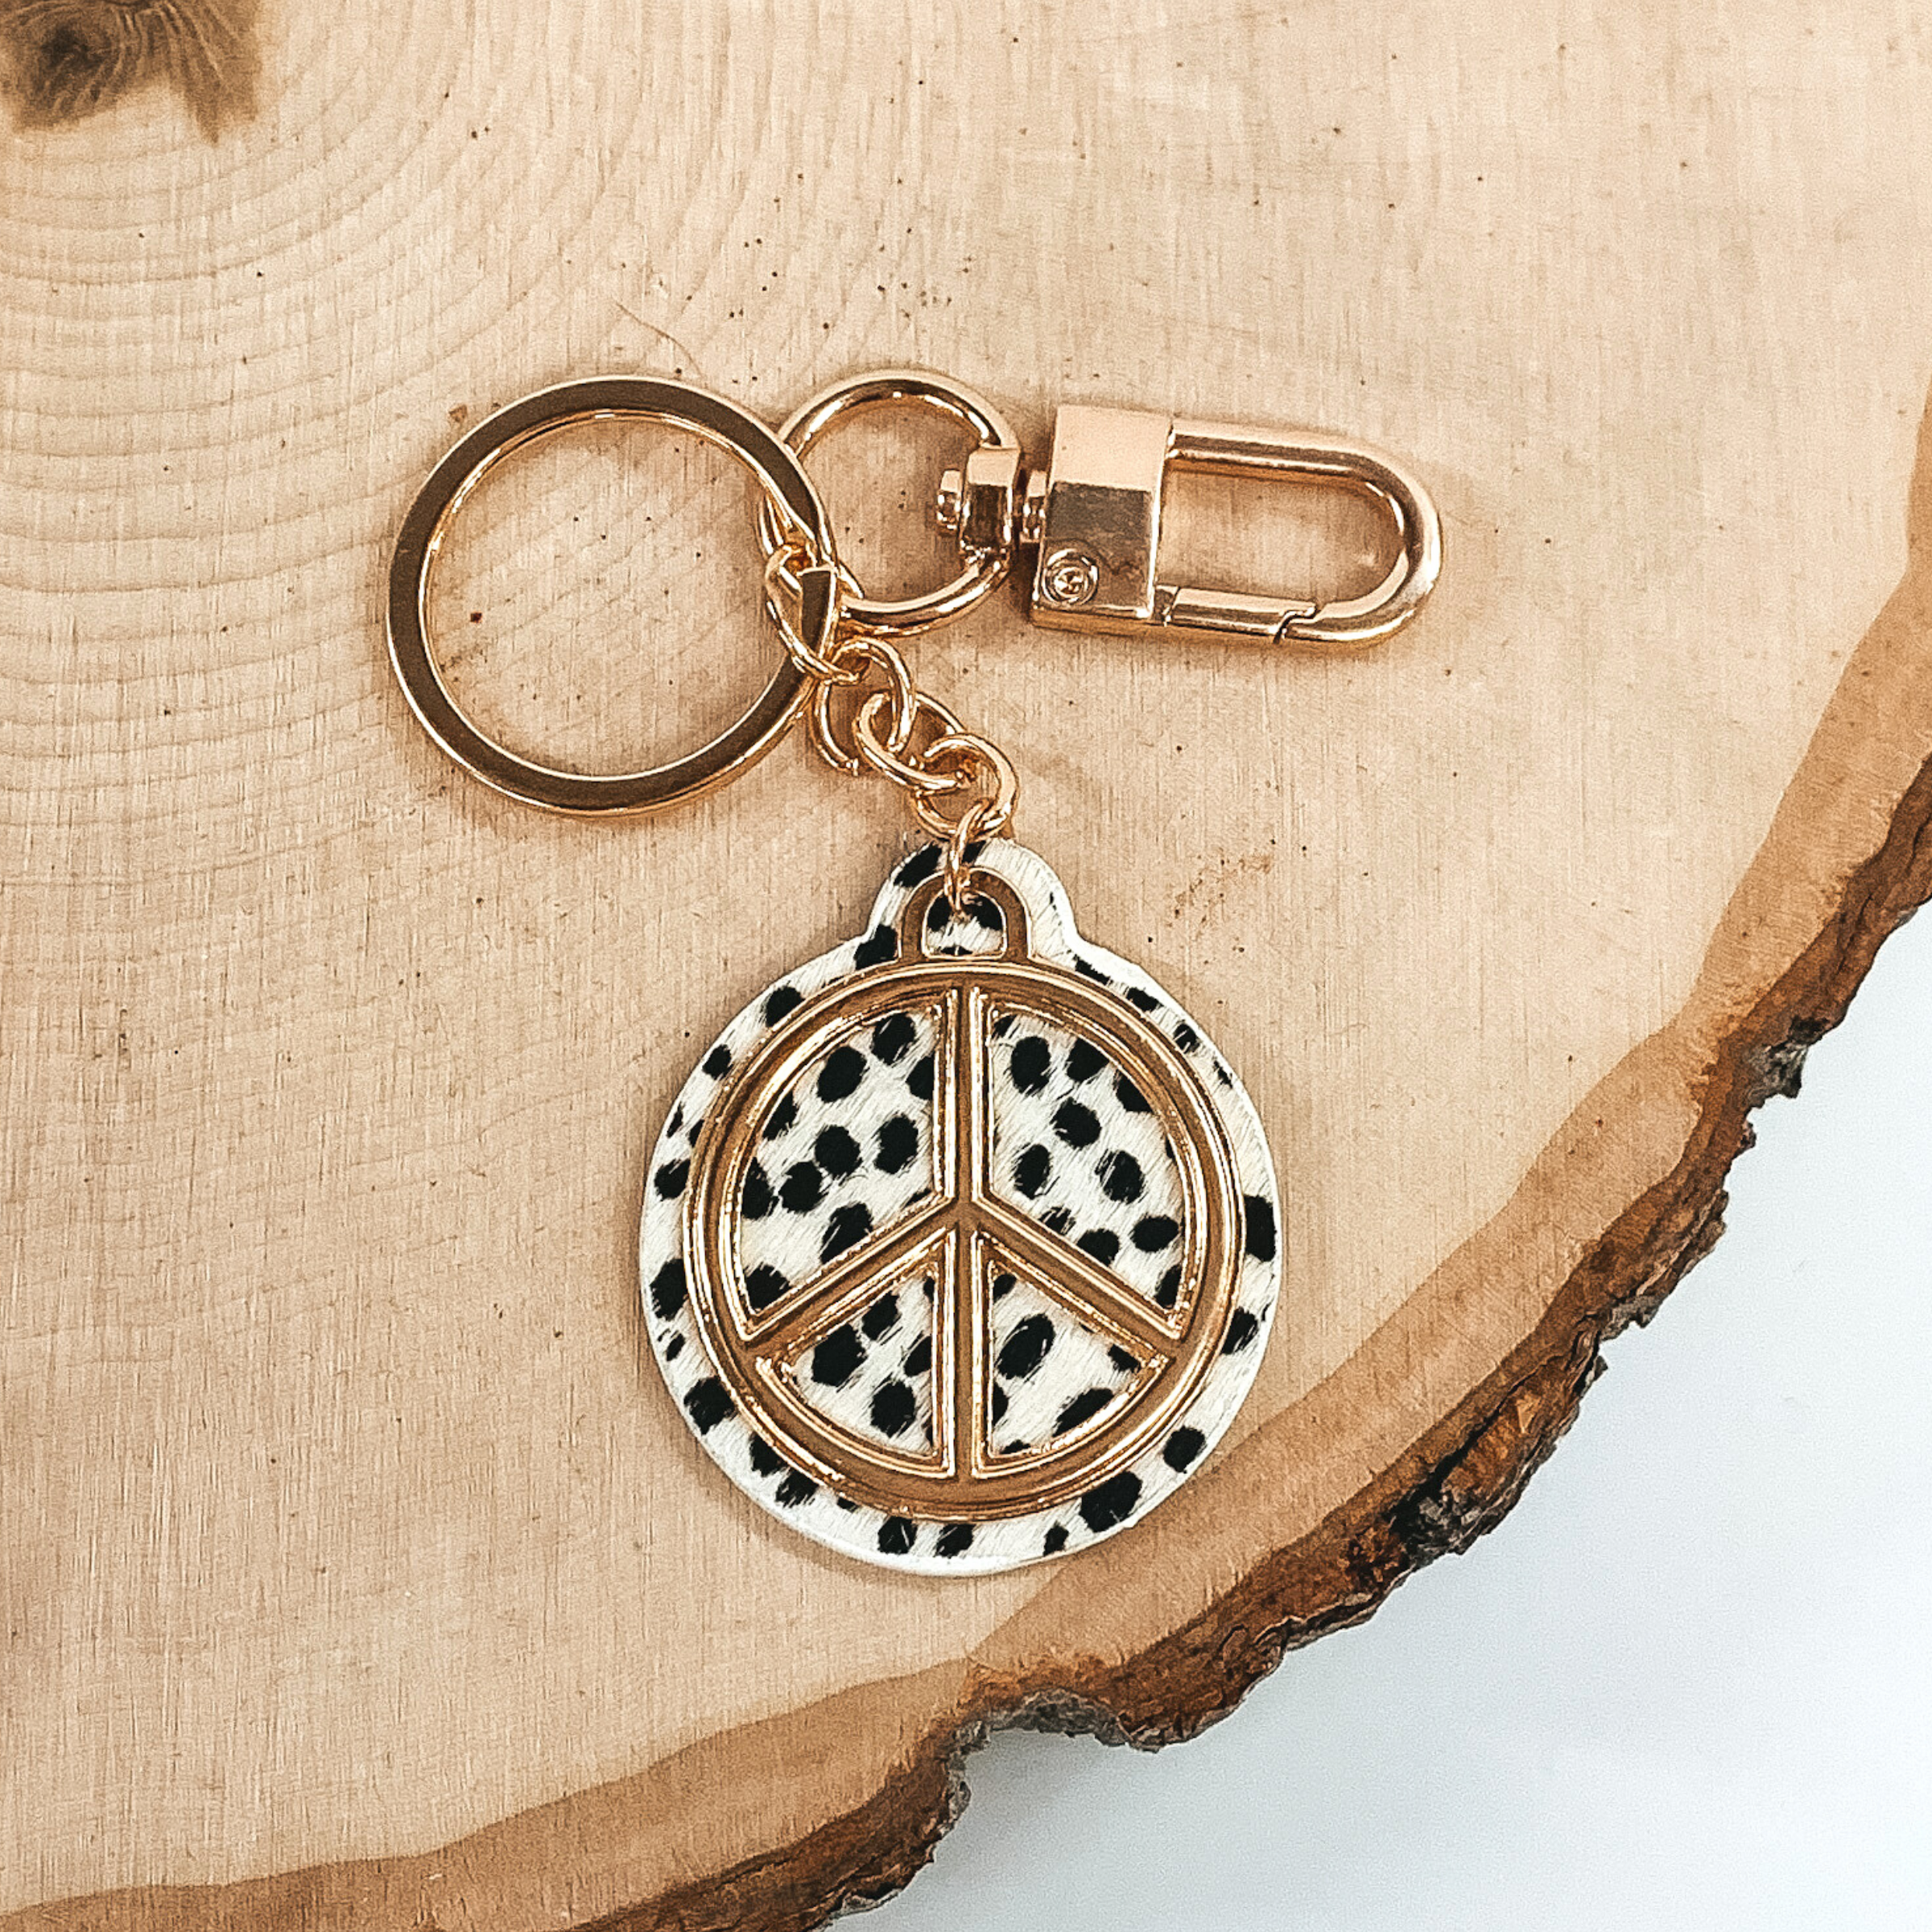 Gold key chain with a white and black dotted print circle pendant that includes a gold peace sign outline. This key chain is pictured on a piece of wood on a white background.